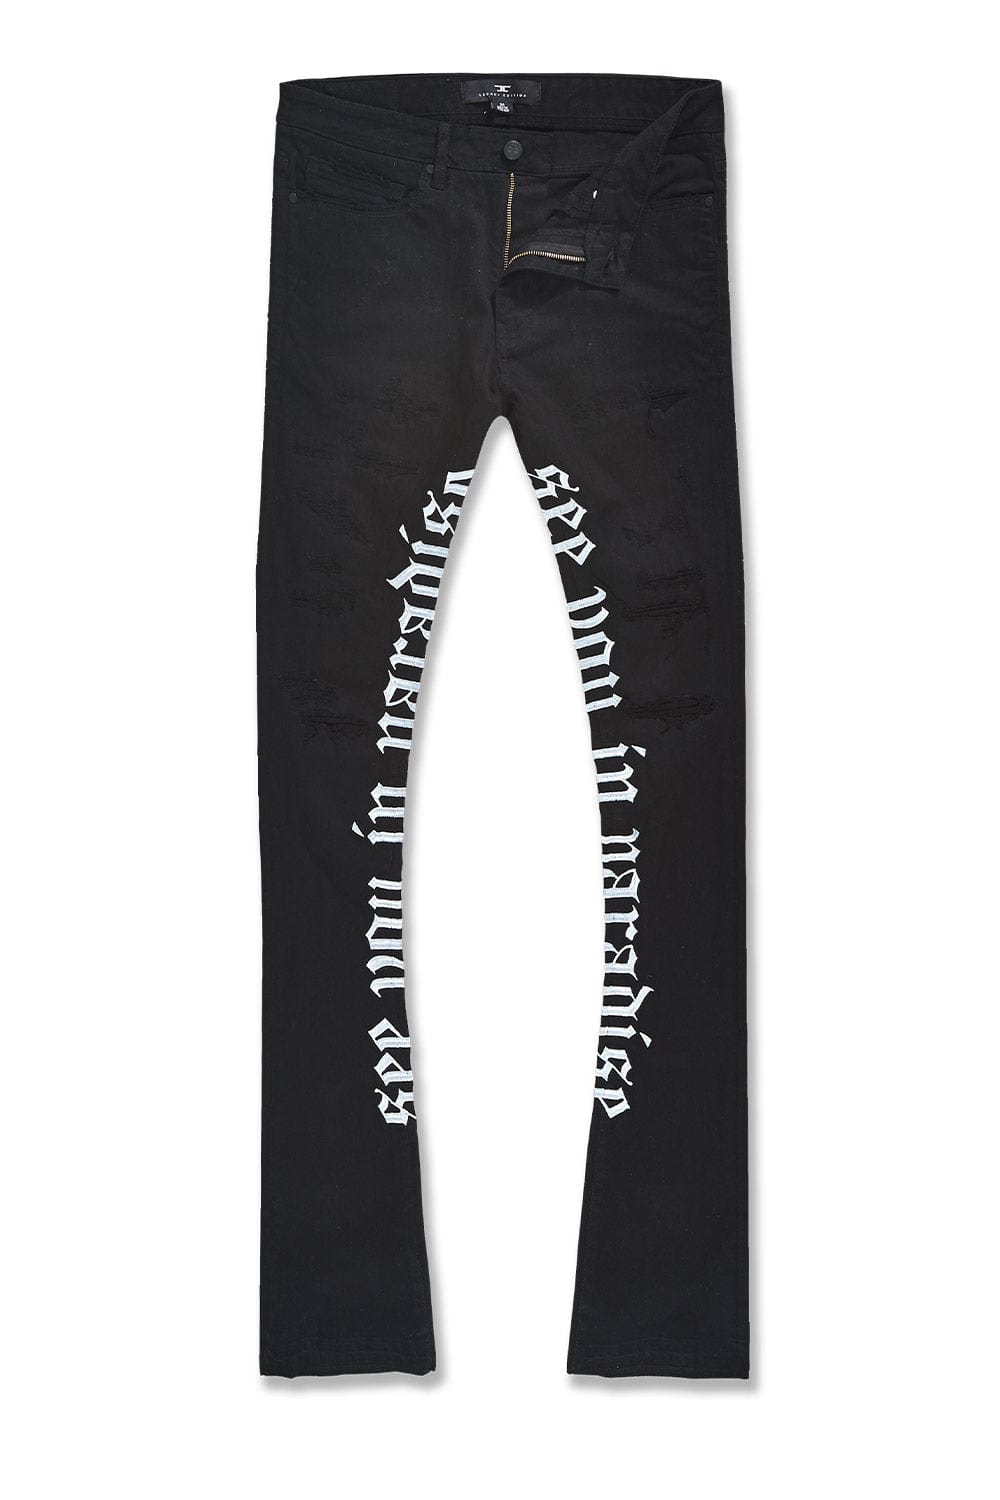 Jordan Craig See You In Paradise Black Stacked Jeans